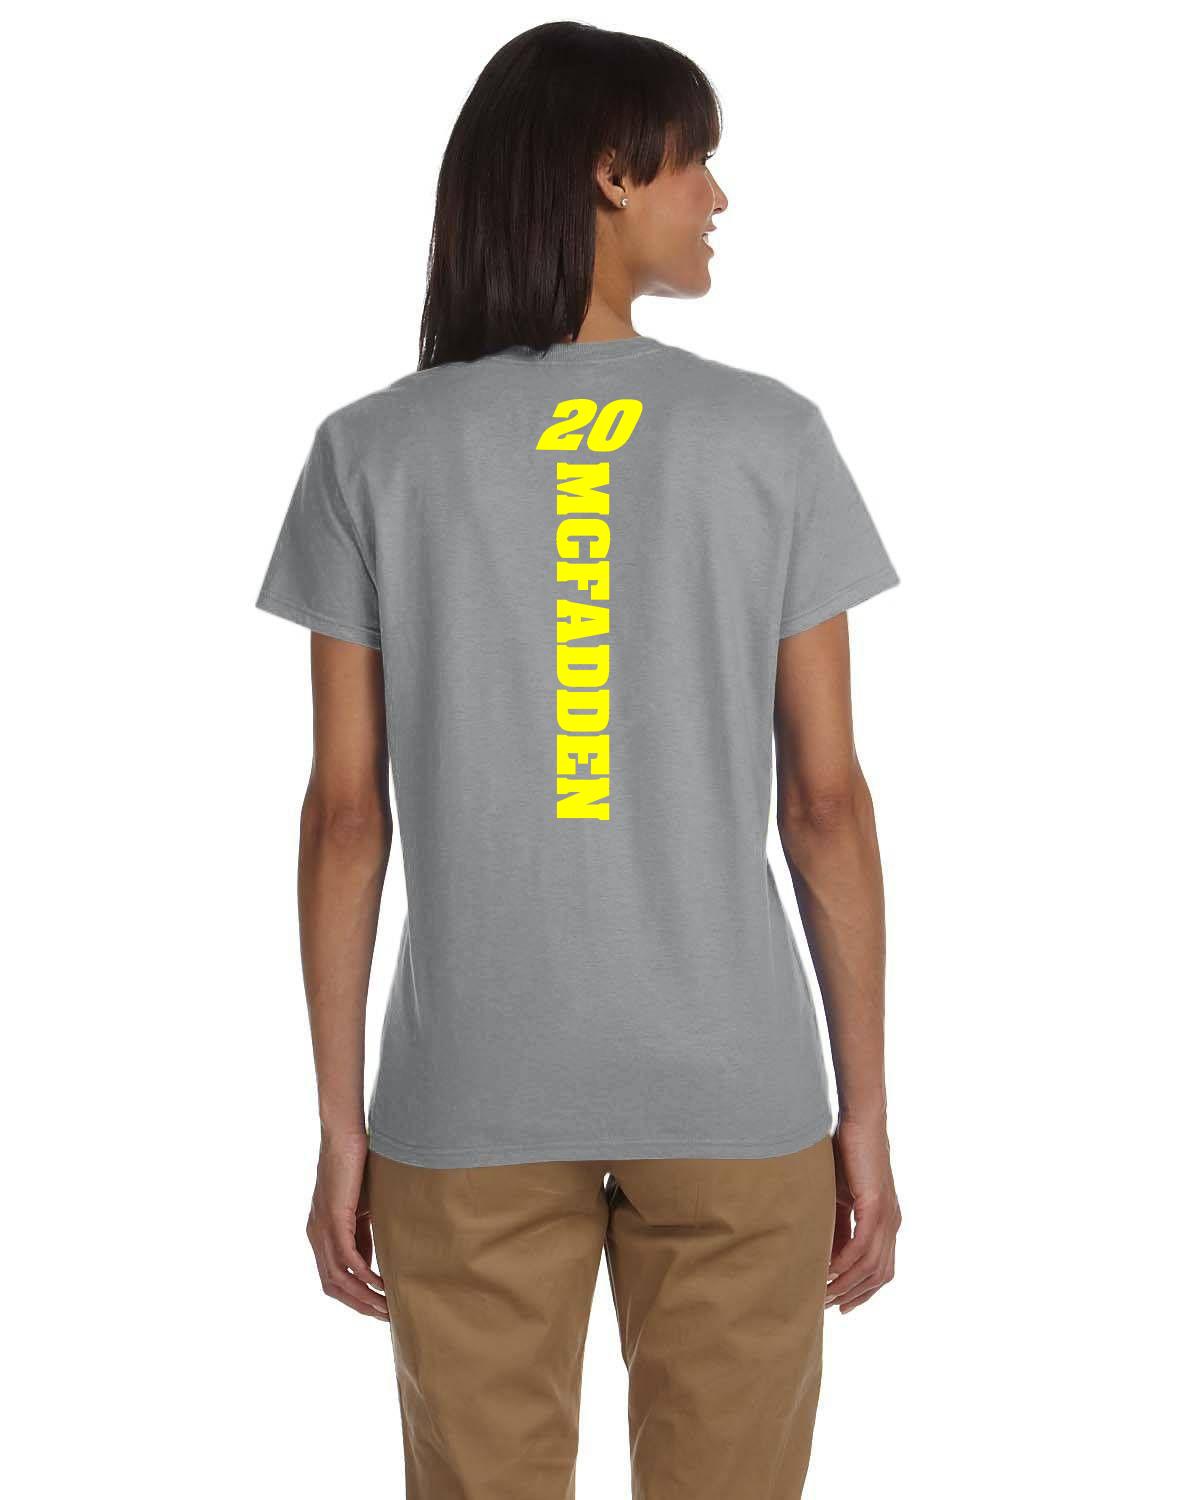 Cole McFadden / Grassroots Racing Name/number Ladies tshirt